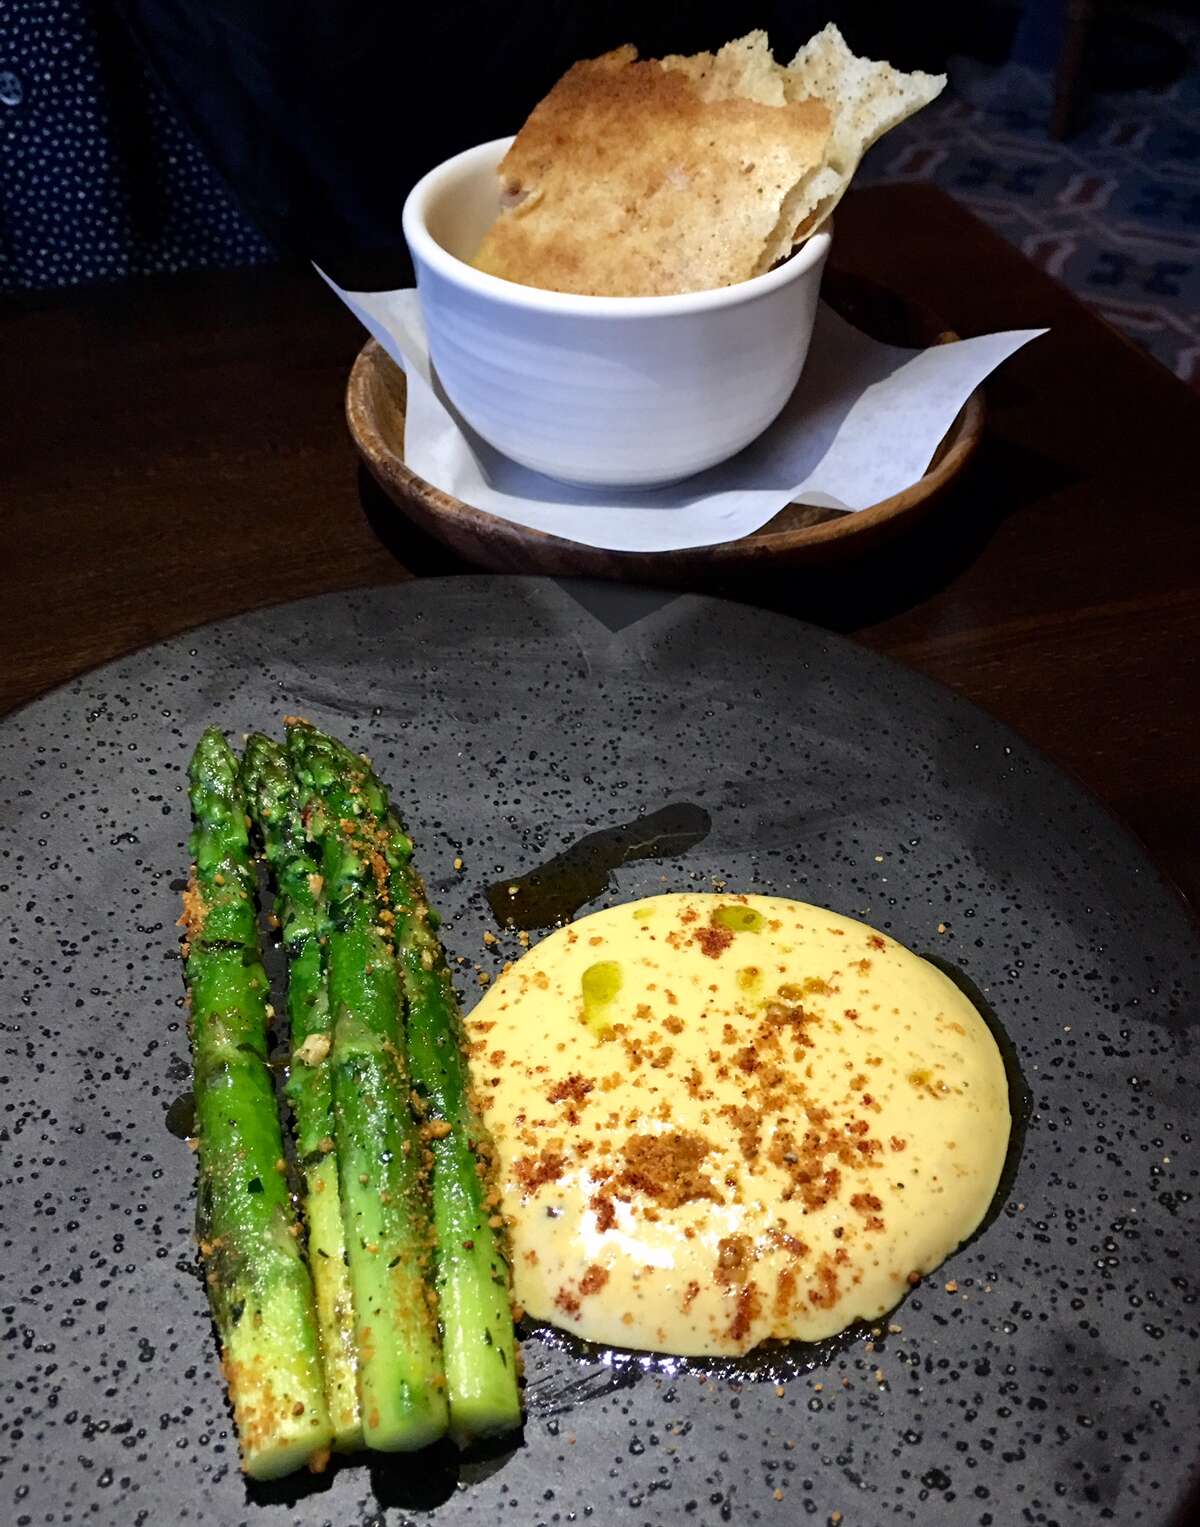 Rooh: Asparagus with cauliflower mousse and dosa chips